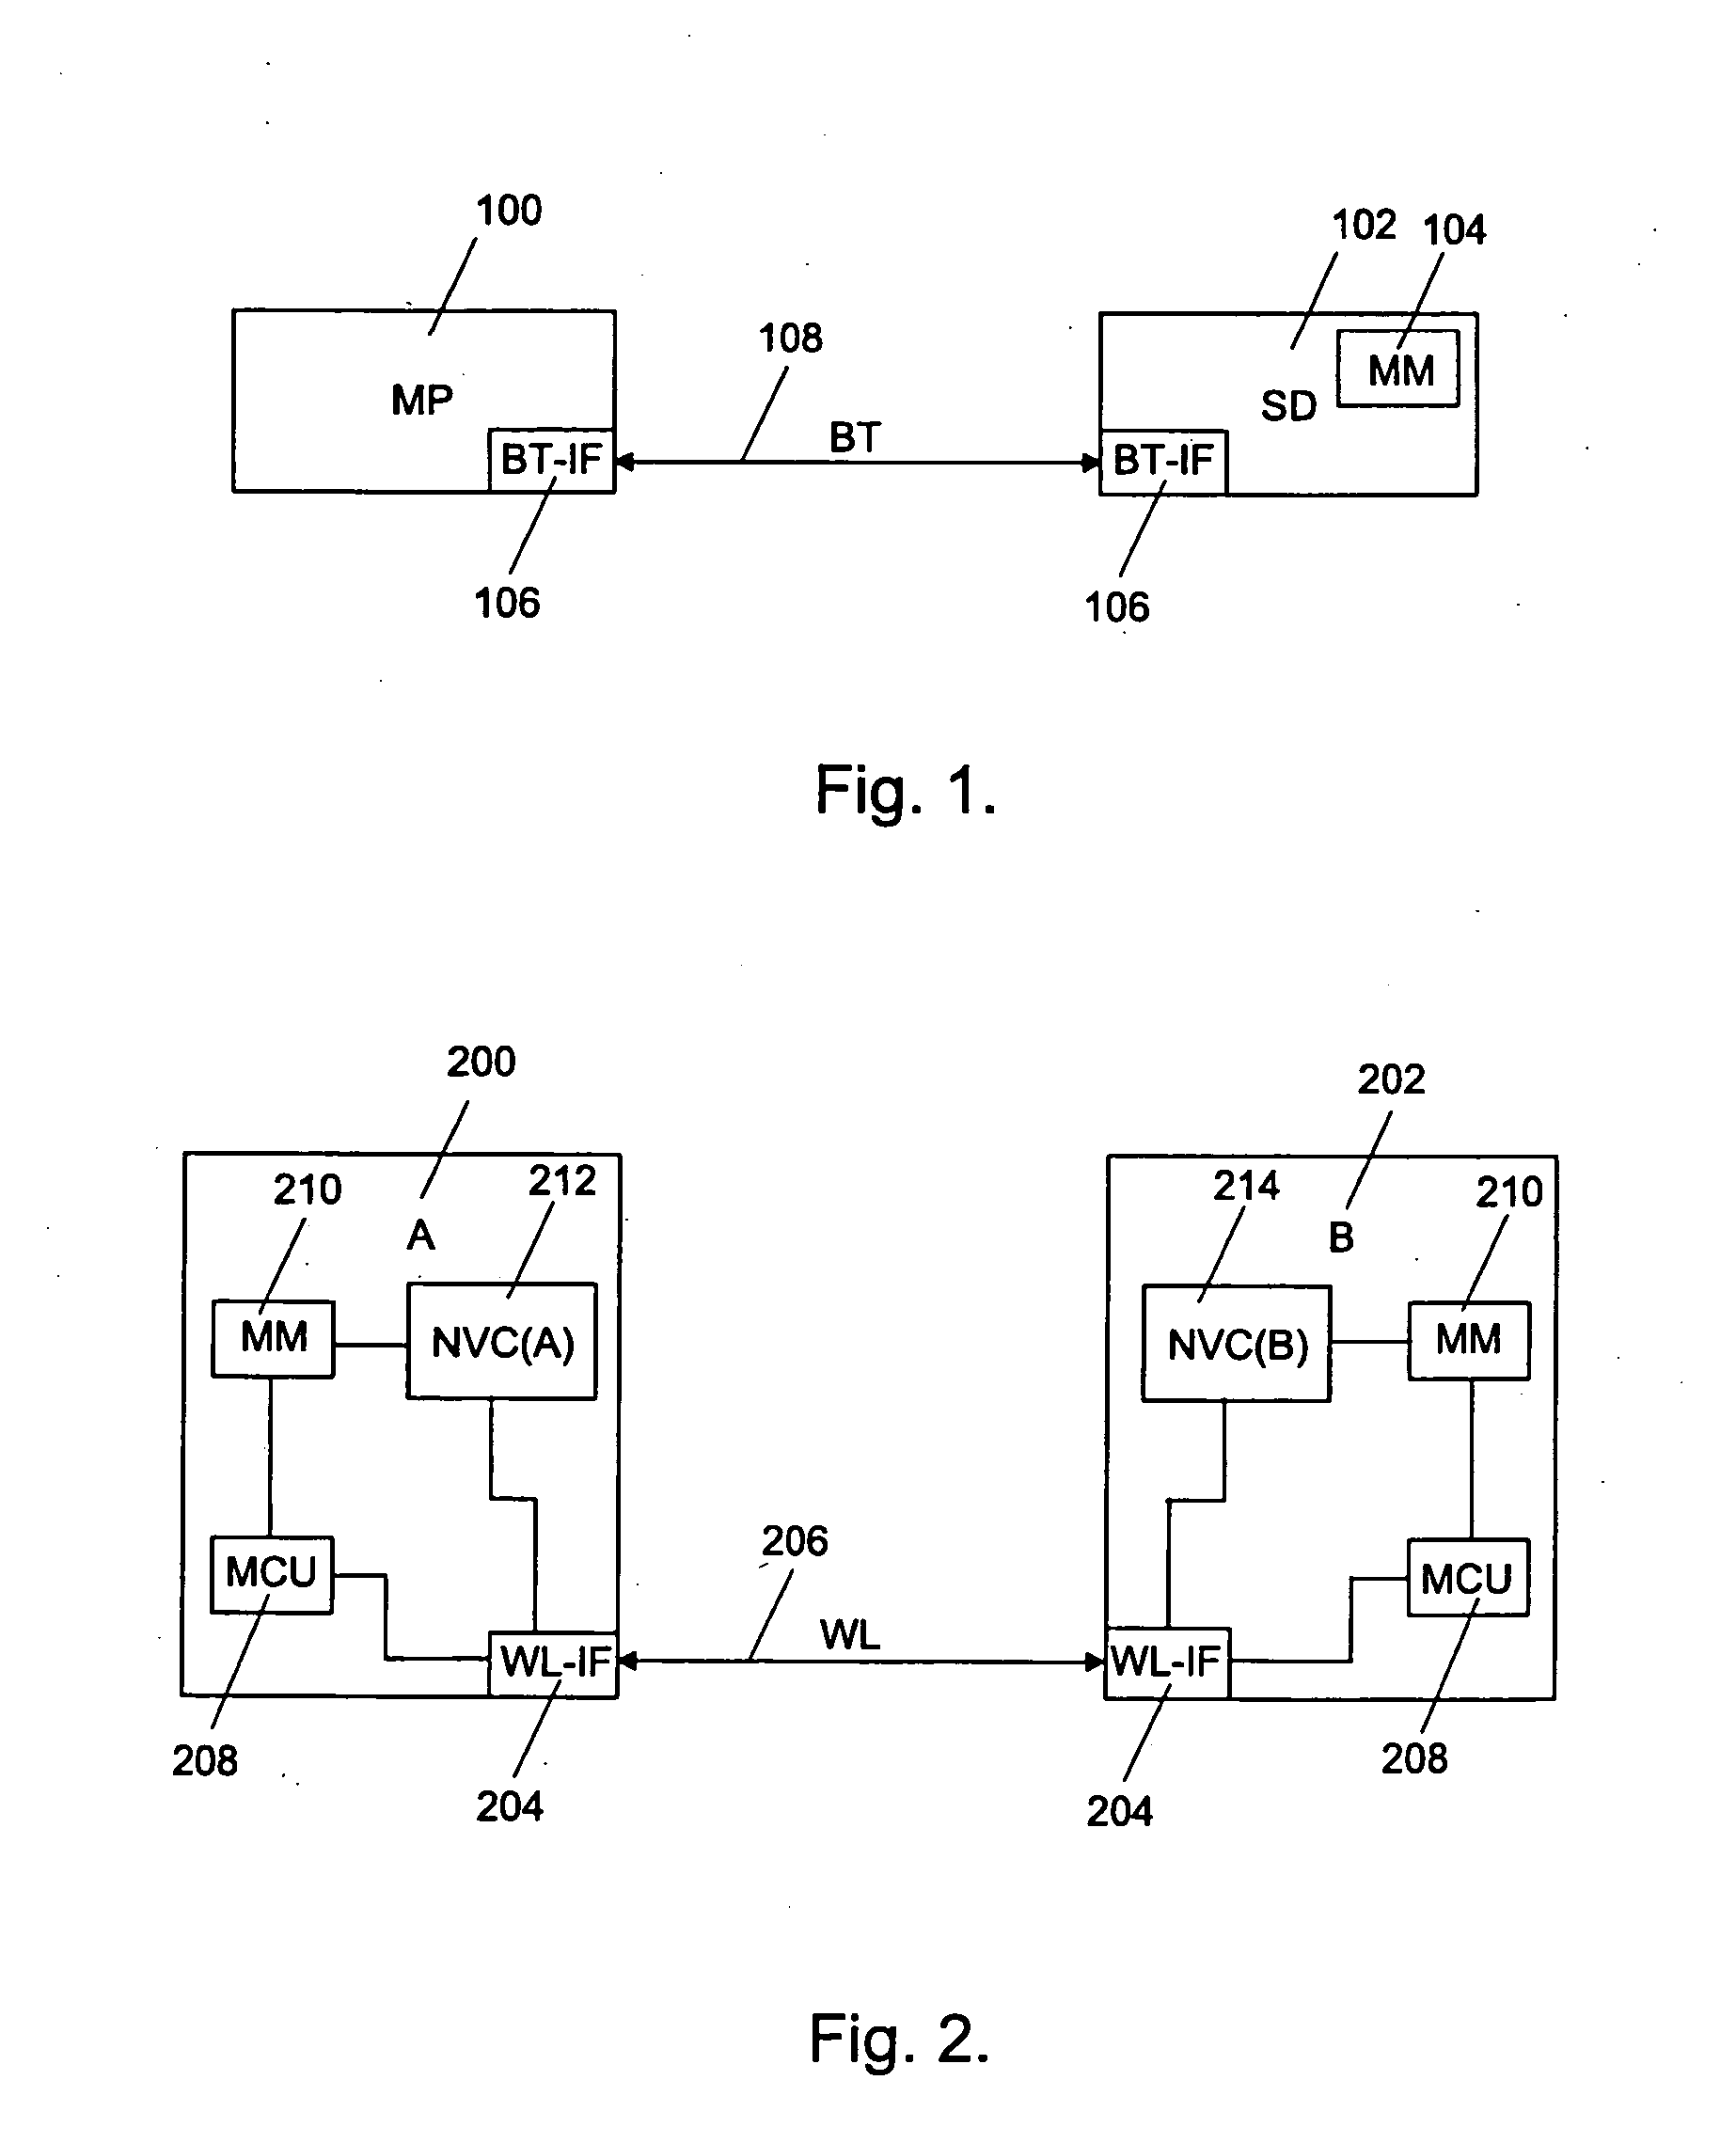 Method for comparing contents of memory components